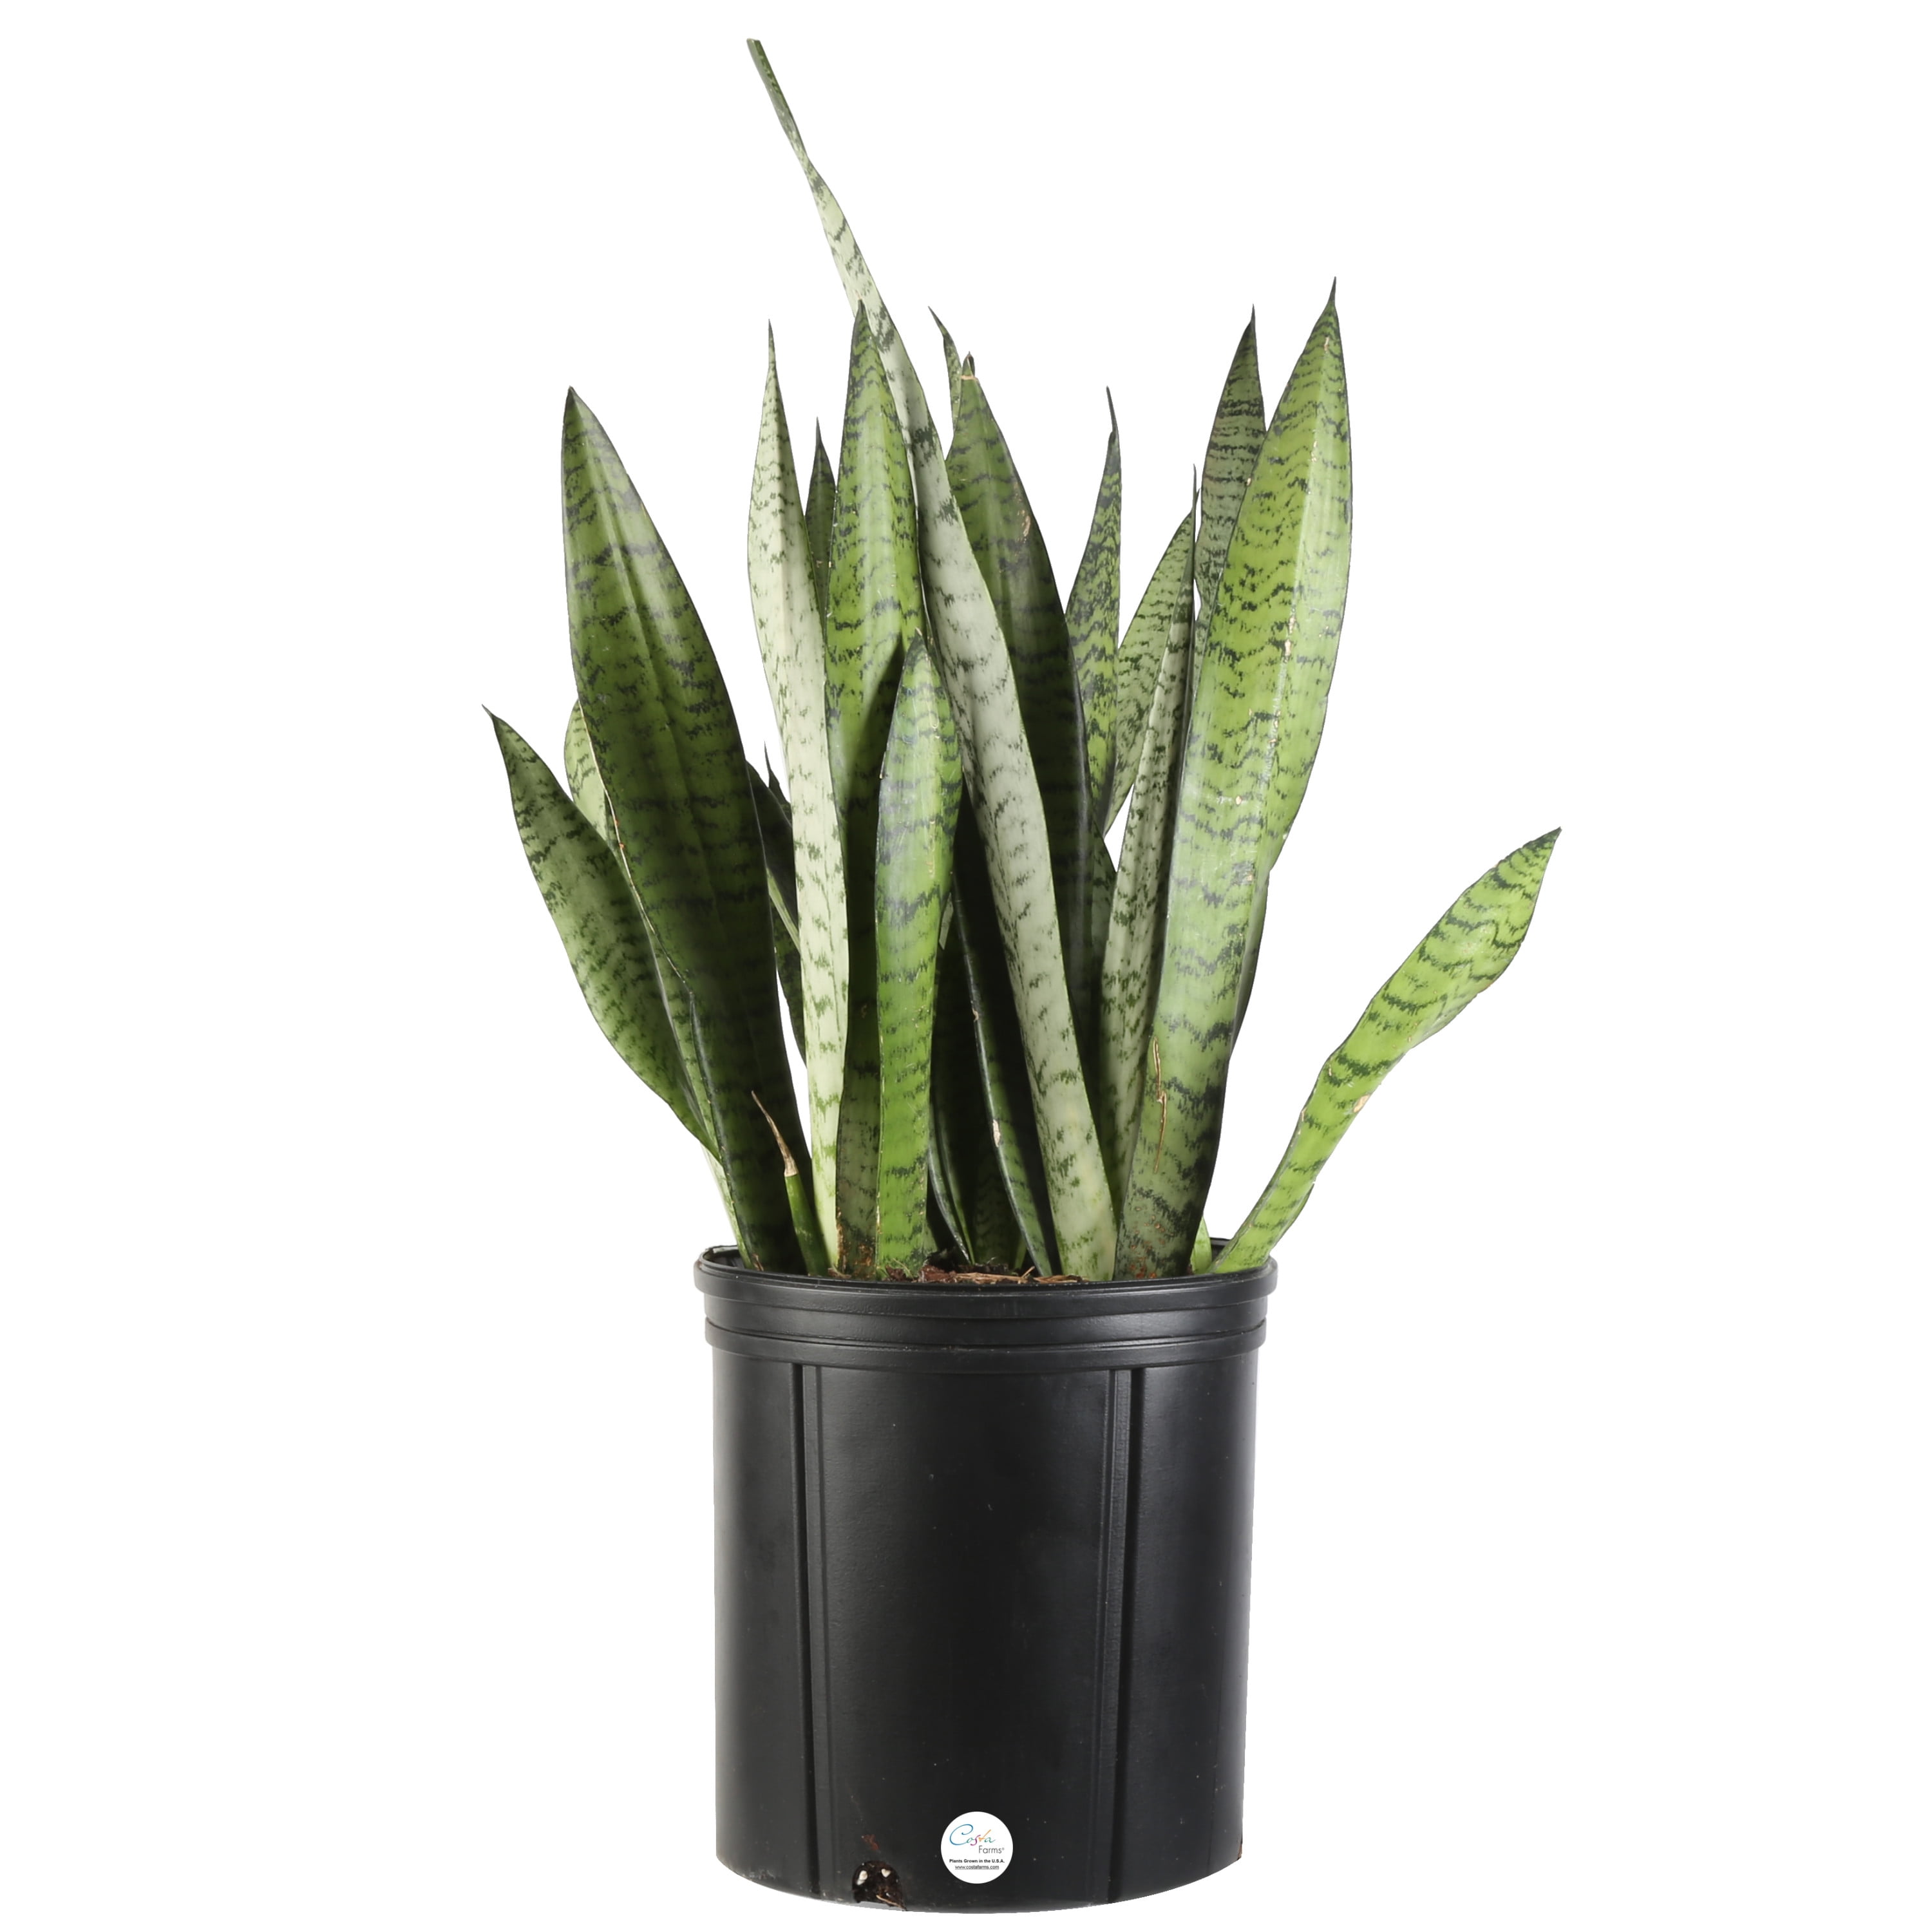 Live Indoor Plant Costa Farms Snake Plant Ships in Grow Pot Sansevieria laurentii 2 to 3-Feet Tall Fresh From Our Farm Excellent Gift 